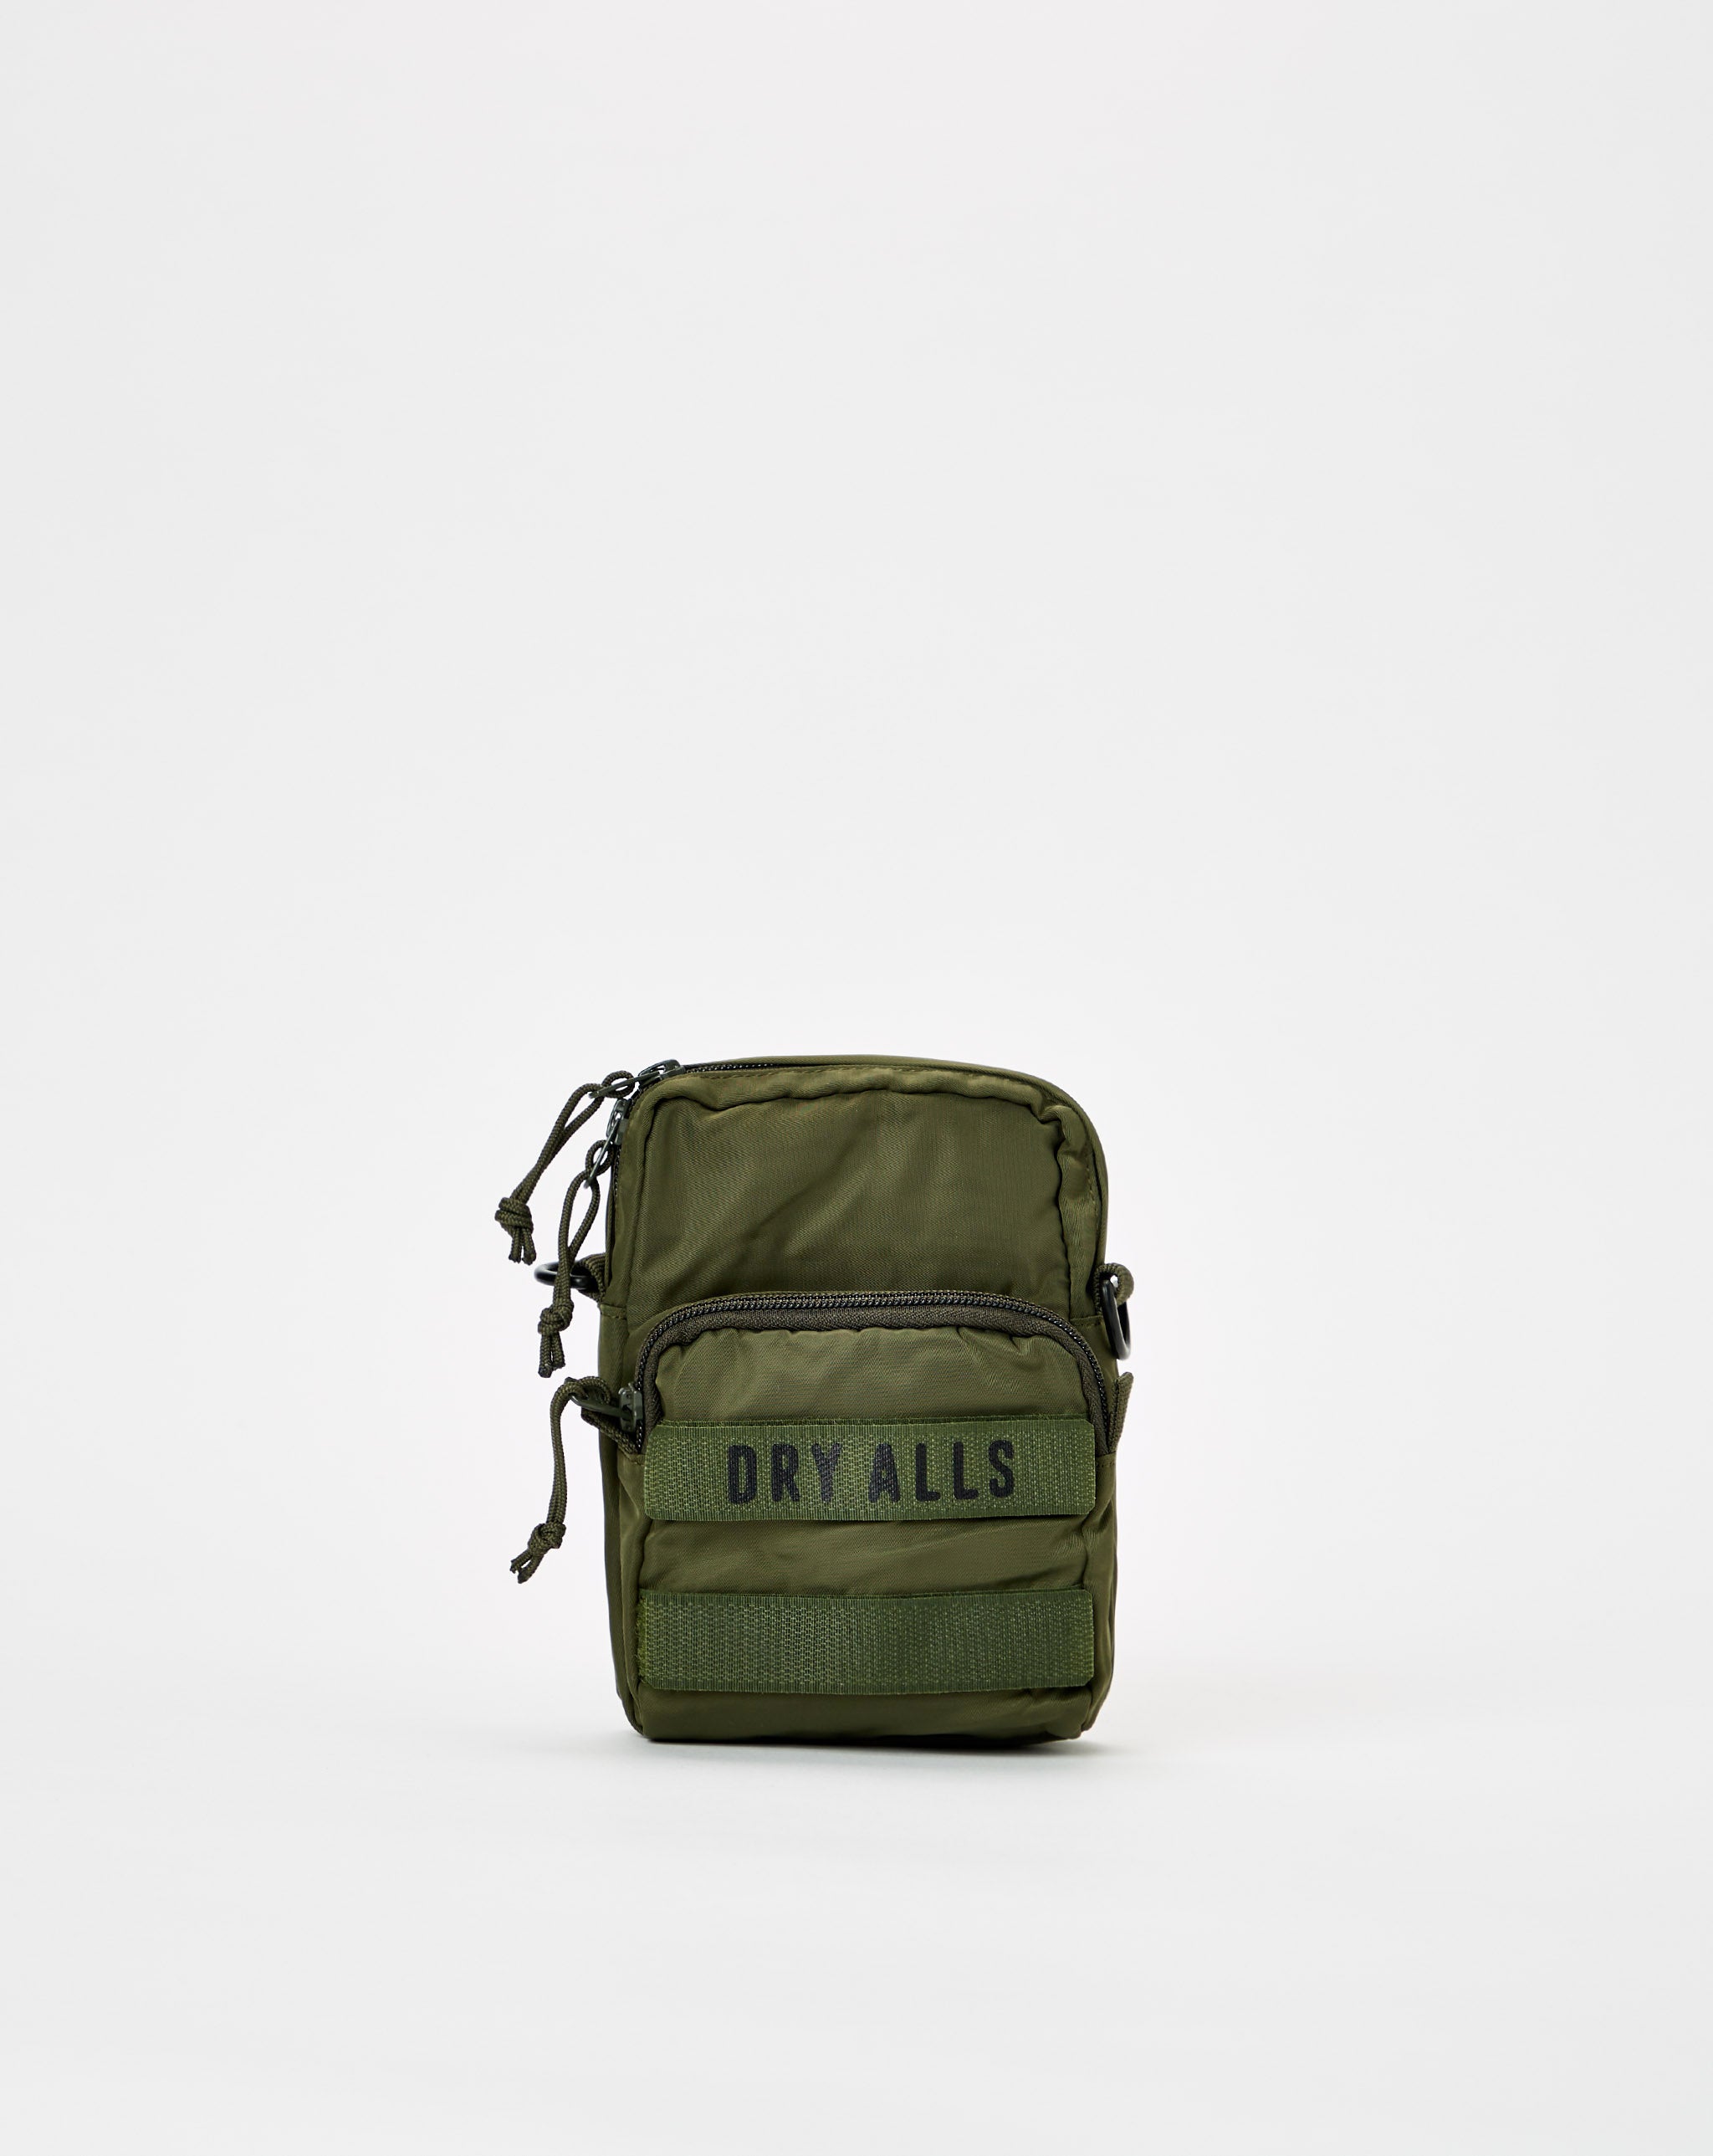 Human Made Military Pouch #2  - Cheap 127-0 Jordan outlet